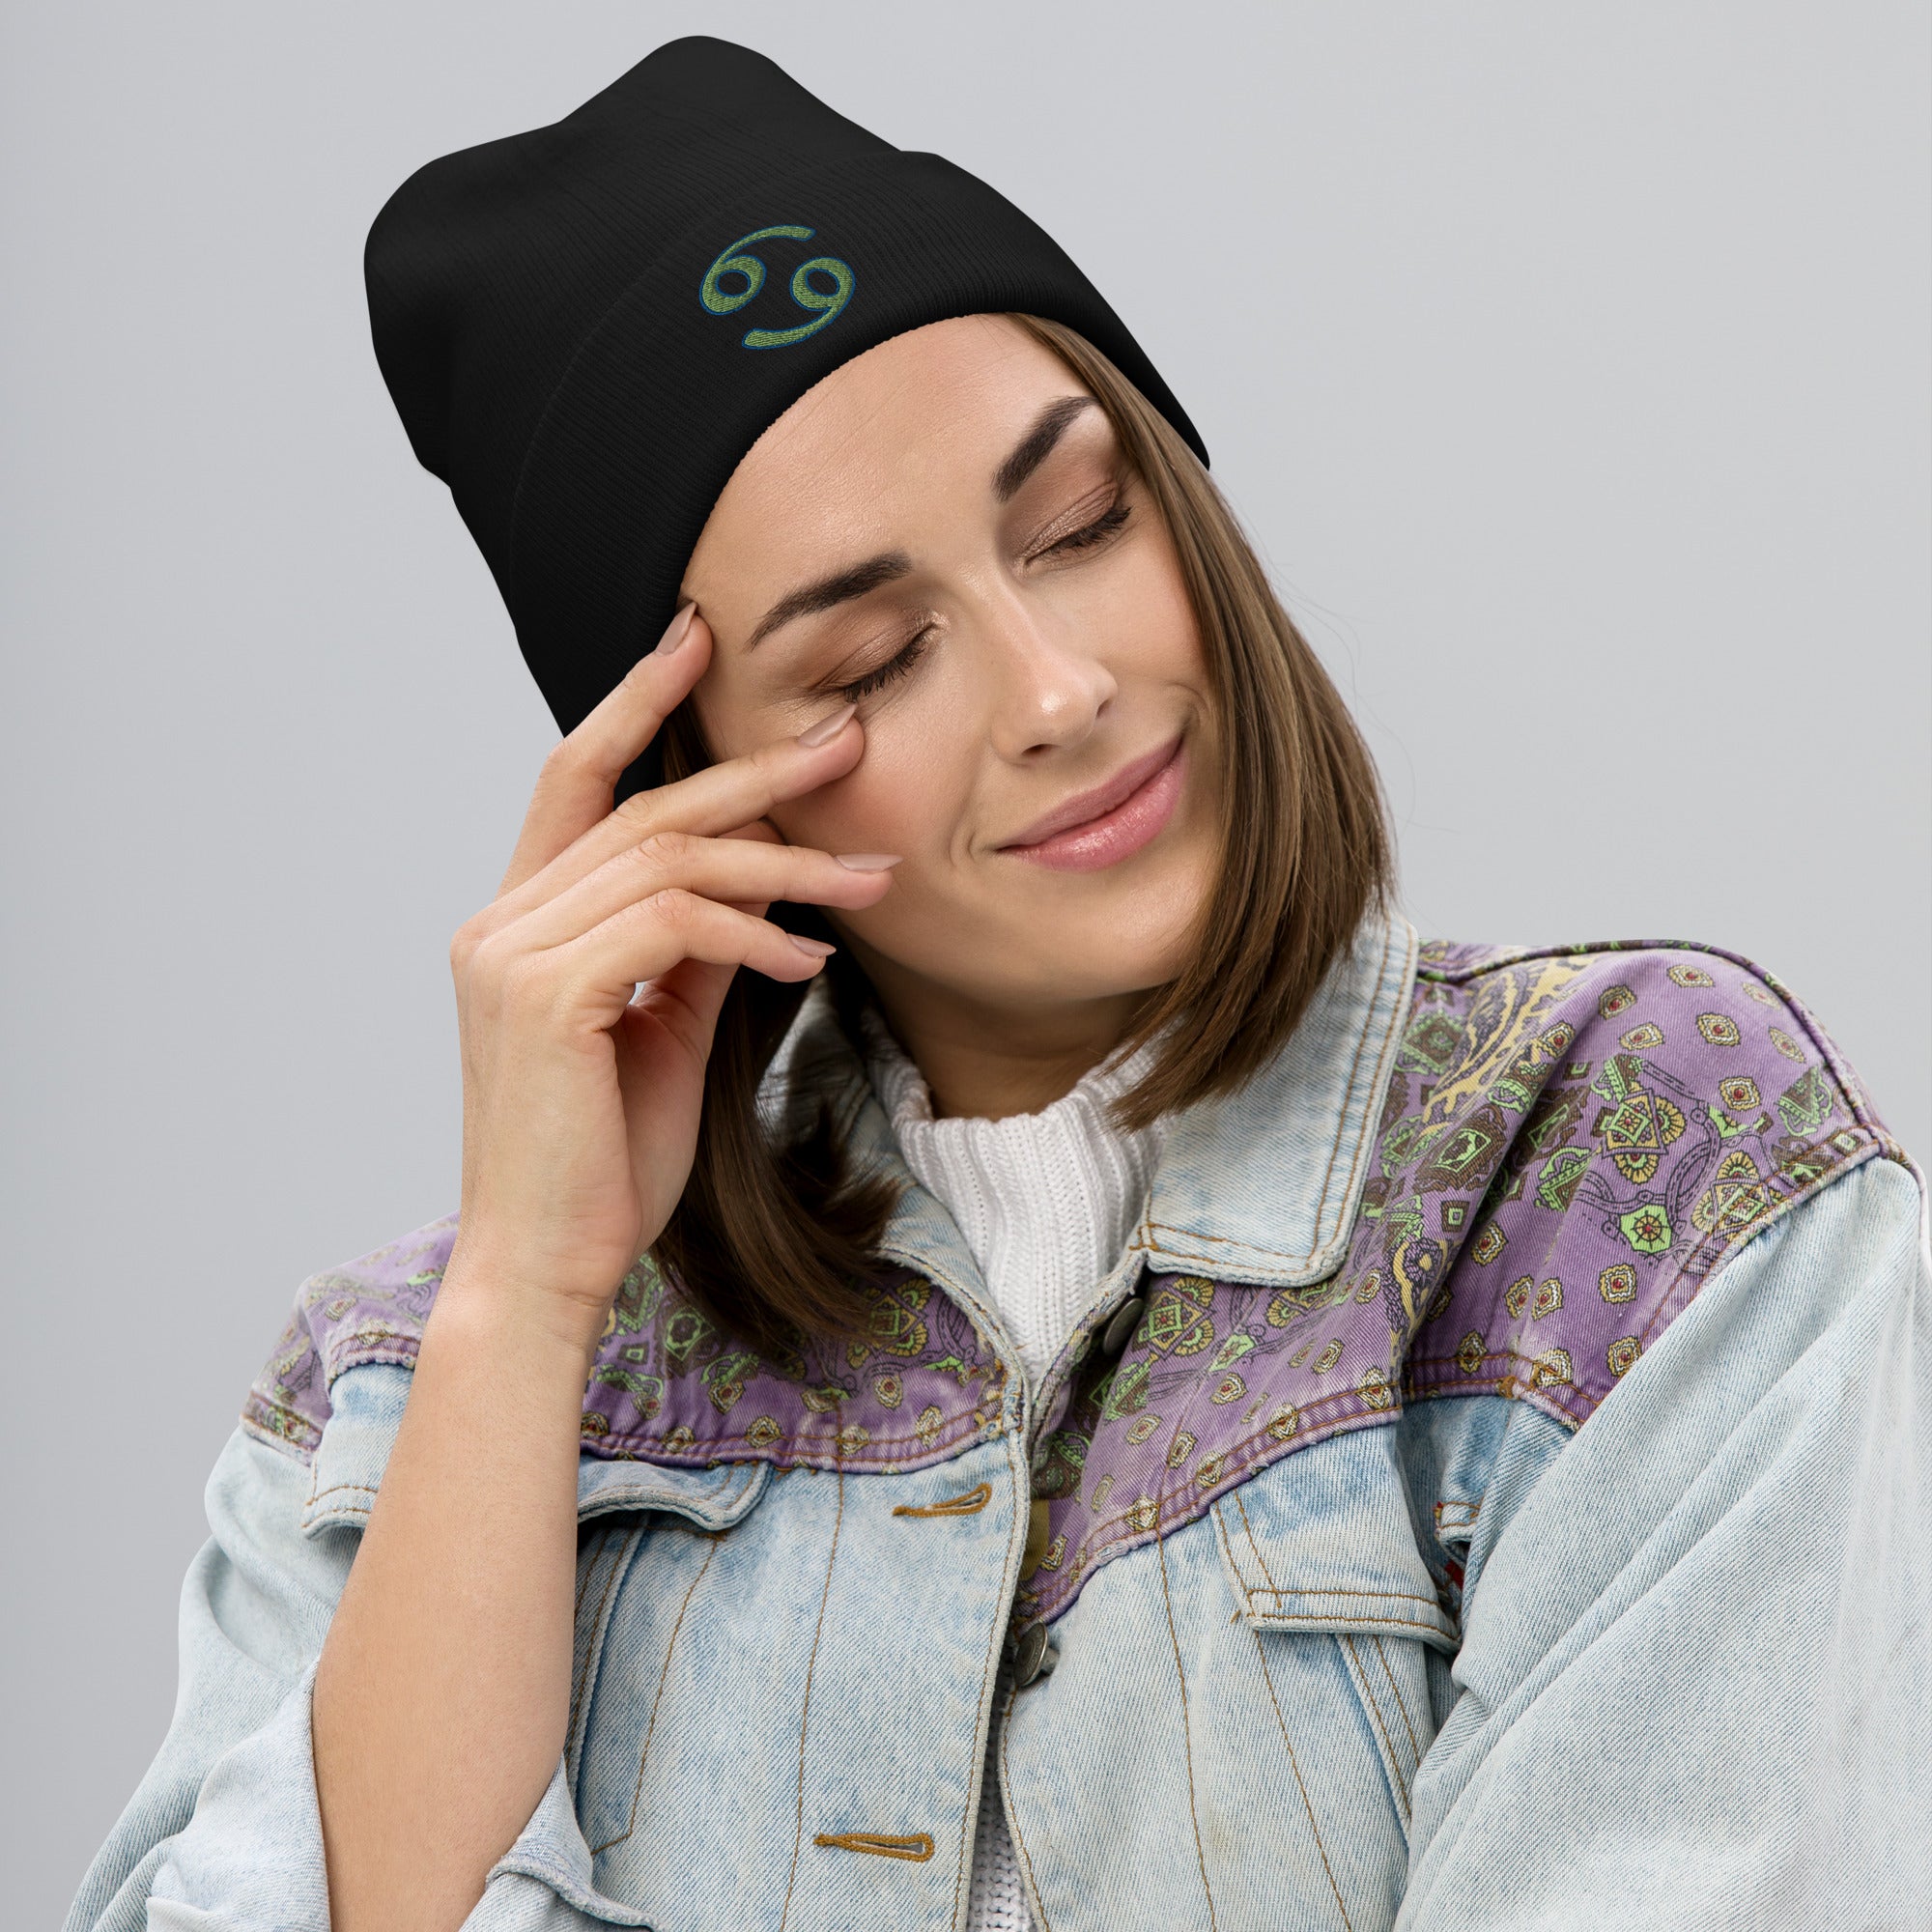 Zodiac Sign Cancer Embroidered Cuff Beanie Astrology Horoscope Blue Green Thread - Edge of Life Designs